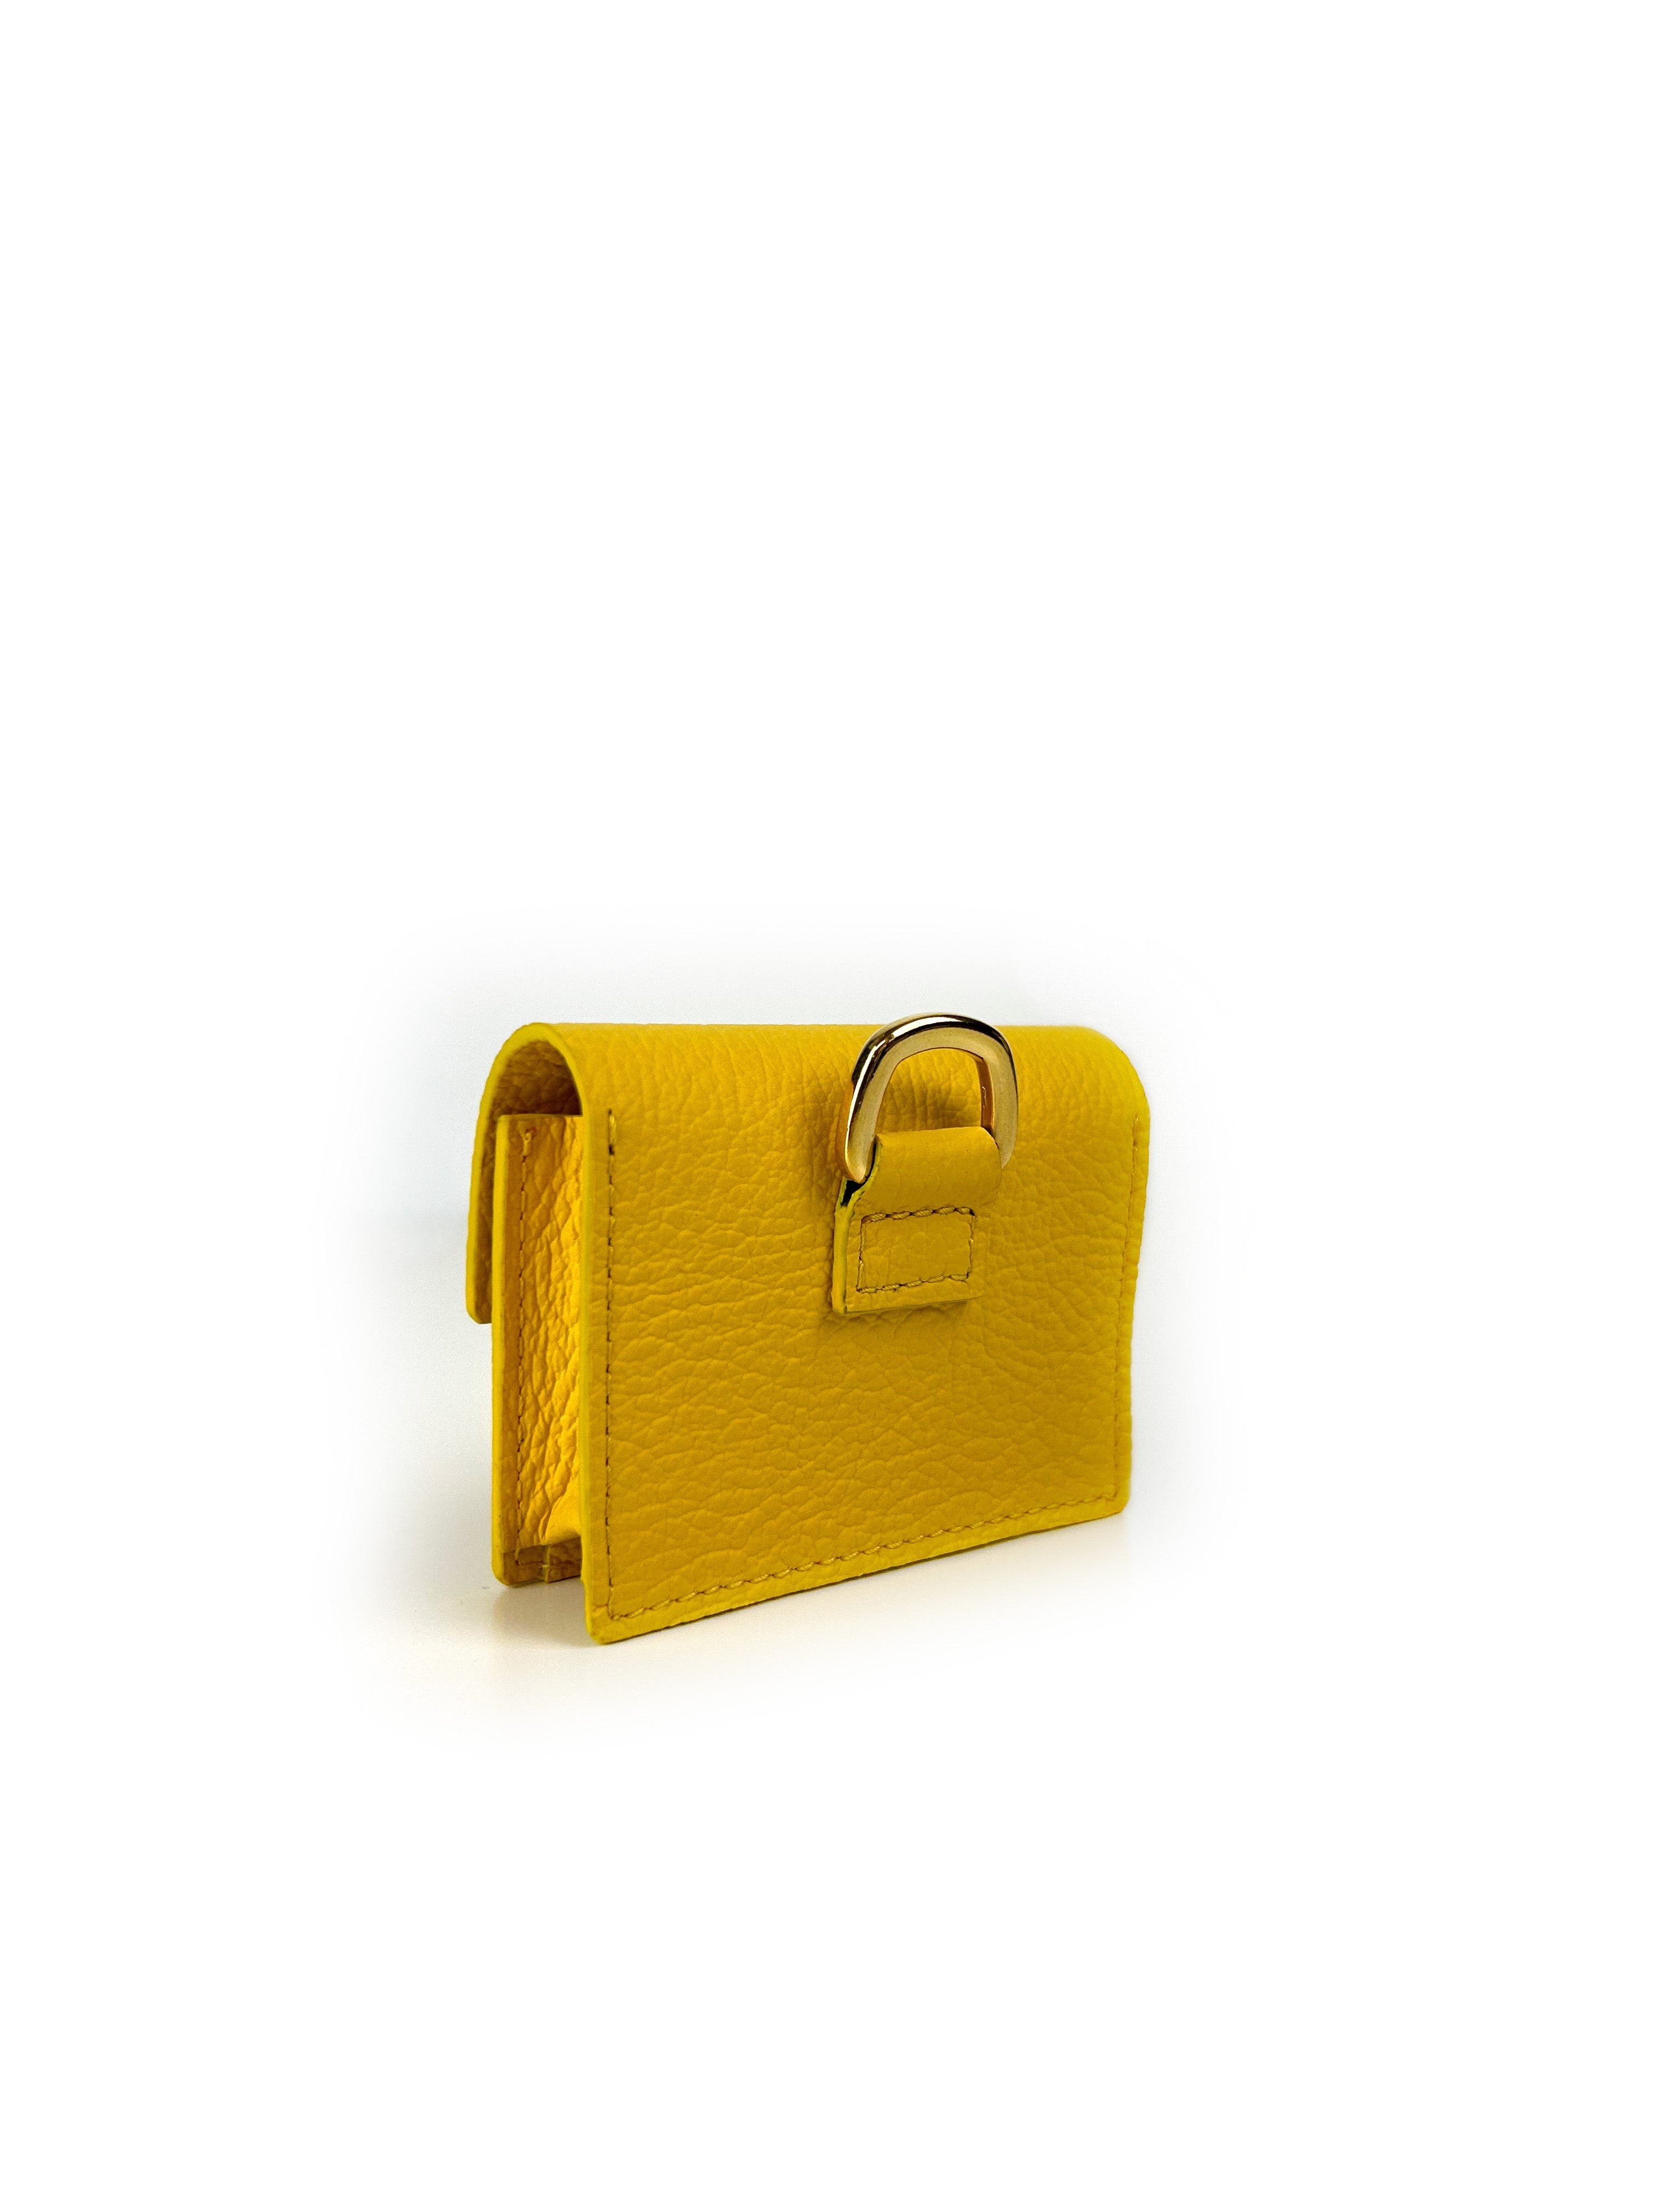 AirPods Case In yellow grained Italian Leather by Alberto Olivero